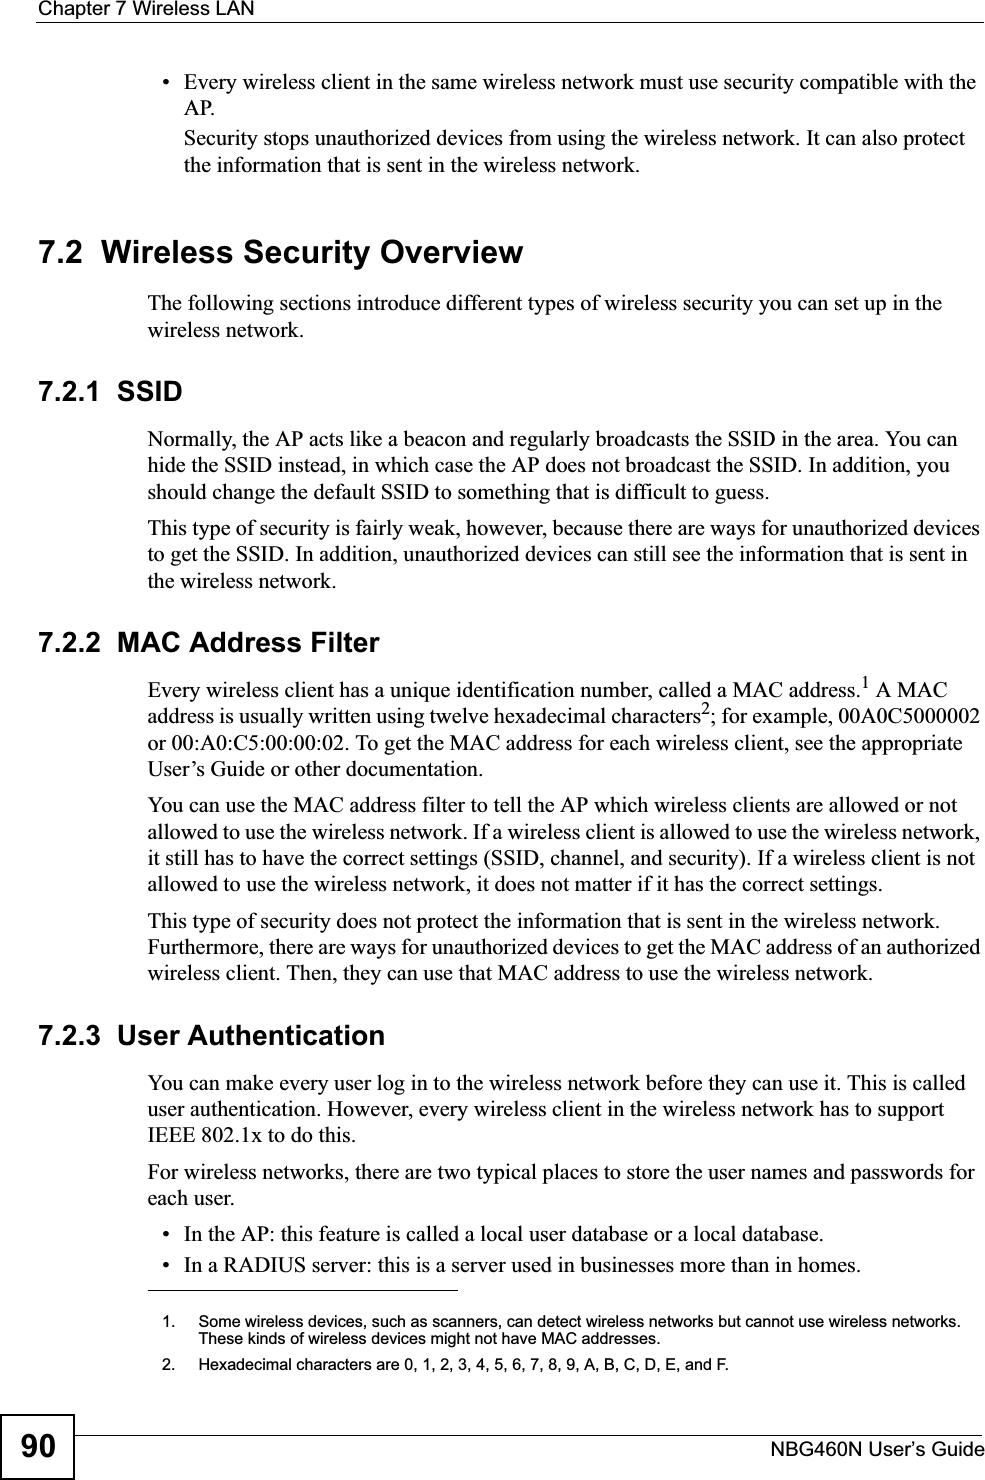 Chapter 7 Wireless LANNBG460N User’s Guide90• Every wireless client in the same wireless network must use security compatible with the AP.Security stops unauthorized devices from using the wireless network. It can also protect the information that is sent in the wireless network.7.2  Wireless Security OverviewThe following sections introduce different types of wireless security you can set up in the wireless network.7.2.1  SSIDNormally, the AP acts like a beacon and regularly broadcasts the SSID in the area. You can hide the SSID instead, in which case the AP does not broadcast the SSID. In addition, you should change the default SSID to something that is difficult to guess.This type of security is fairly weak, however, because there are ways for unauthorized devices to get the SSID. In addition, unauthorized devices can still see the information that is sent in the wireless network.7.2.2  MAC Address FilterEvery wireless client has a unique identification number, called a MAC address.1 A MAC address is usually written using twelve hexadecimal characters2; for example, 00A0C5000002 or 00:A0:C5:00:00:02. To get the MAC address for each wireless client, see the appropriate User’s Guide or other documentation.You can use the MAC address filter to tell the AP which wireless clients are allowed or not allowed to use the wireless network. If a wireless client is allowed to use the wireless network, it still has to have the correct settings (SSID, channel, and security). If a wireless client is not allowed to use the wireless network, it does not matter if it has the correct settings.This type of security does not protect the information that is sent in the wireless network. Furthermore, there are ways for unauthorized devices to get the MAC address of an authorized wireless client. Then, they can use that MAC address to use the wireless network.7.2.3  User AuthenticationYou can make every user log in to the wireless network before they can use it. This is called user authentication. However, every wireless client in the wireless network has to support IEEE 802.1x to do this.For wireless networks, there are two typical places to store the user names and passwords for each user.• In the AP: this feature is called a local user database or a local database.• In a RADIUS server: this is a server used in businesses more than in homes.1. Some wireless devices, such as scanners, can detect wireless networks but cannot use wireless networks. These kinds of wireless devices might not have MAC addresses.2. Hexadecimal characters are 0, 1, 2, 3, 4, 5, 6, 7, 8, 9, A, B, C, D, E, and F.